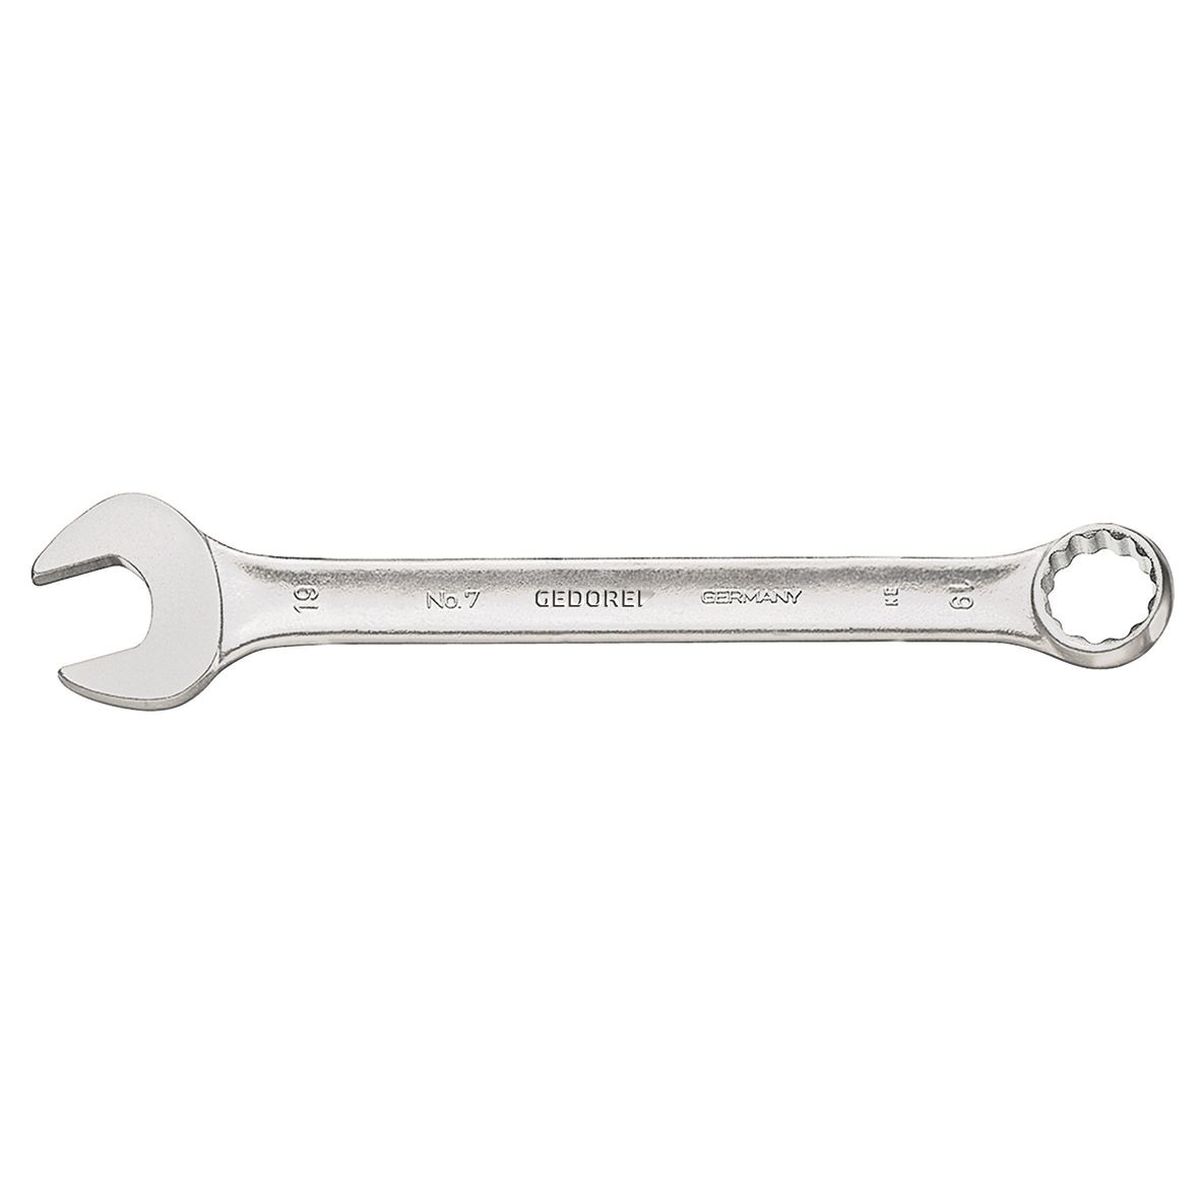 Combination spanner 10mm No.7 10 Gedore